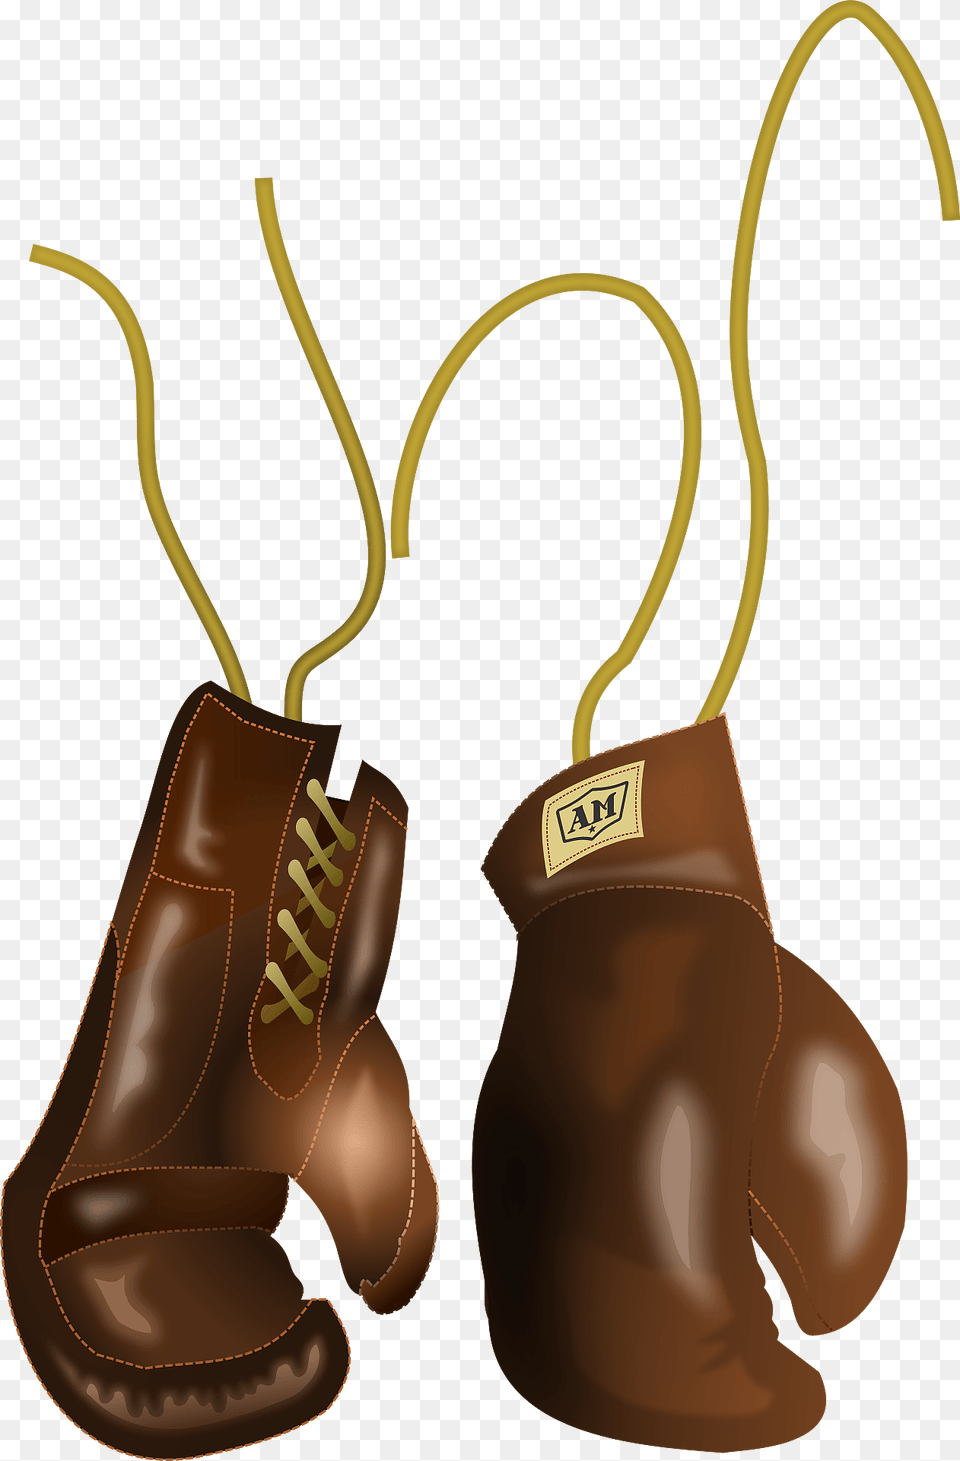 Vintage Leather Boxing Gloves Clipart, Clothing, Glove, Smoke Pipe Png Image